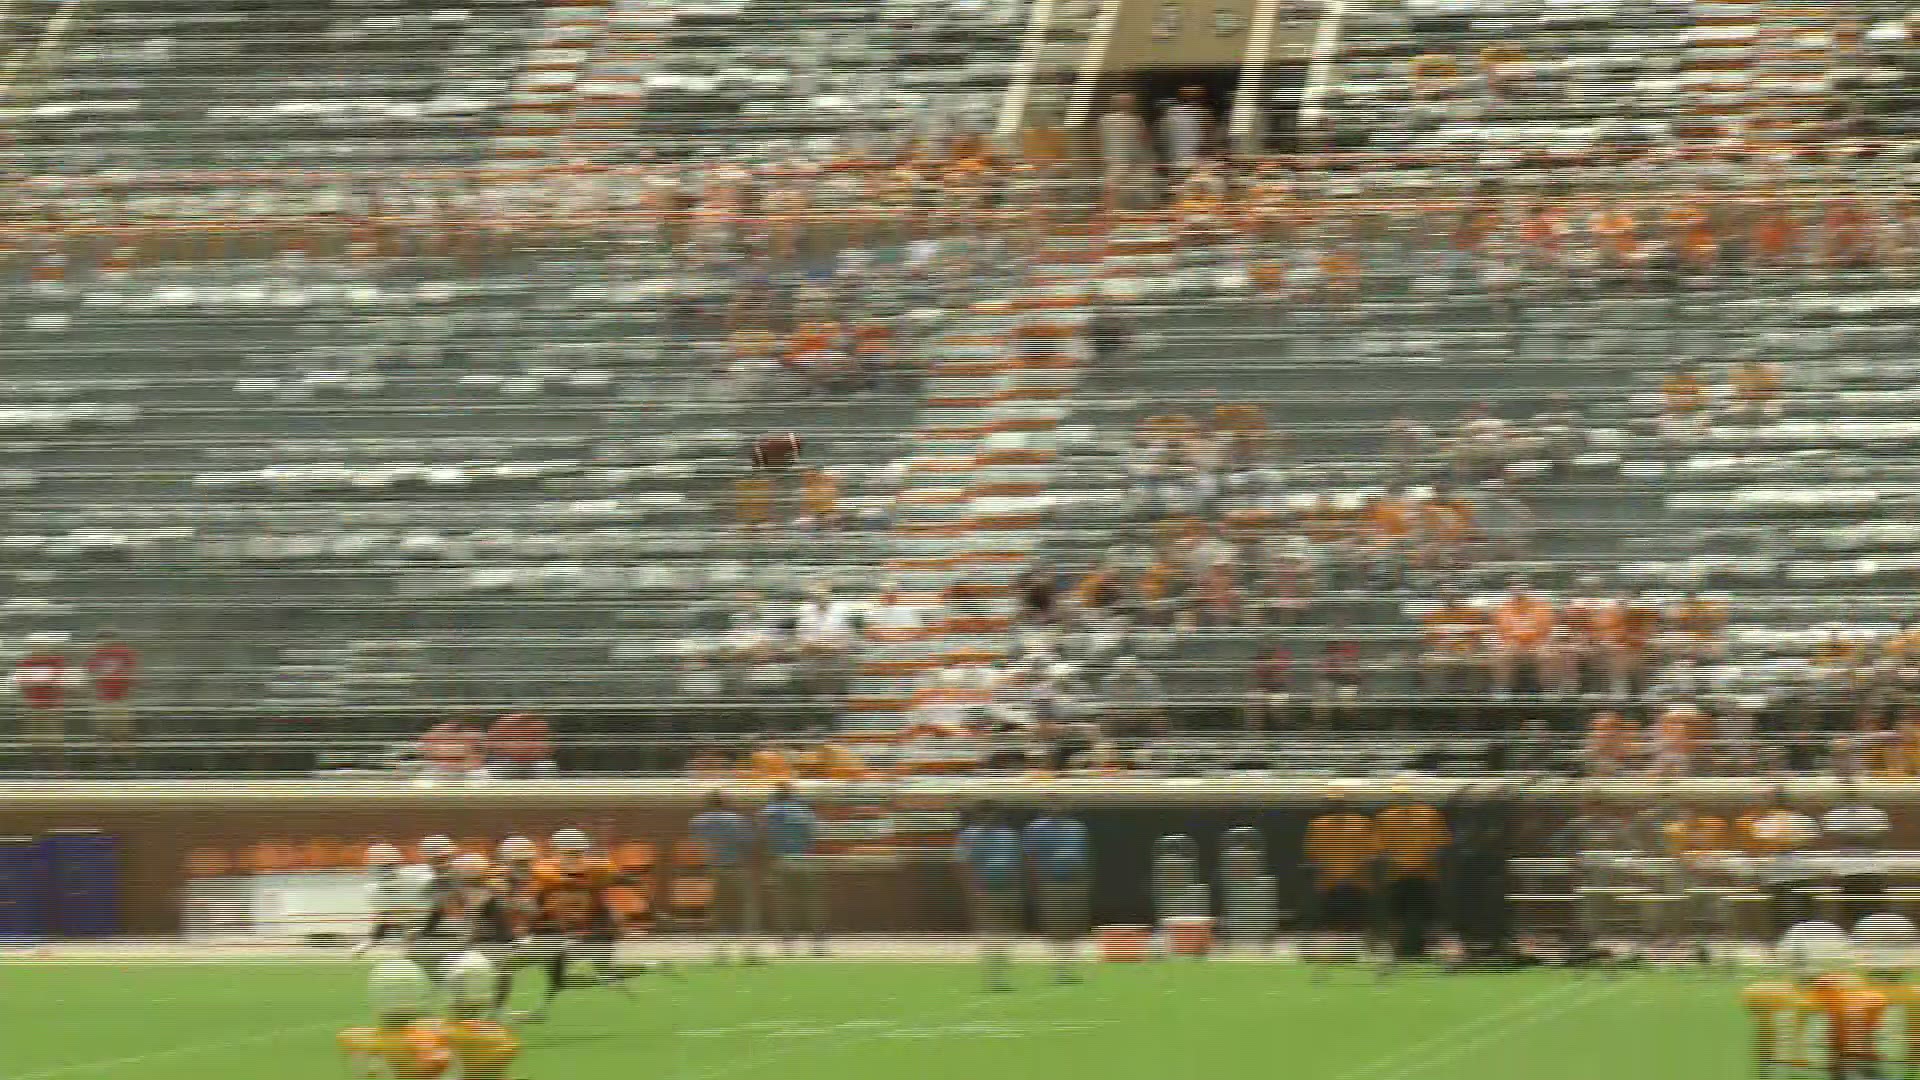 Check out the Vols on the field during Fan Day in Neyland Stadium.